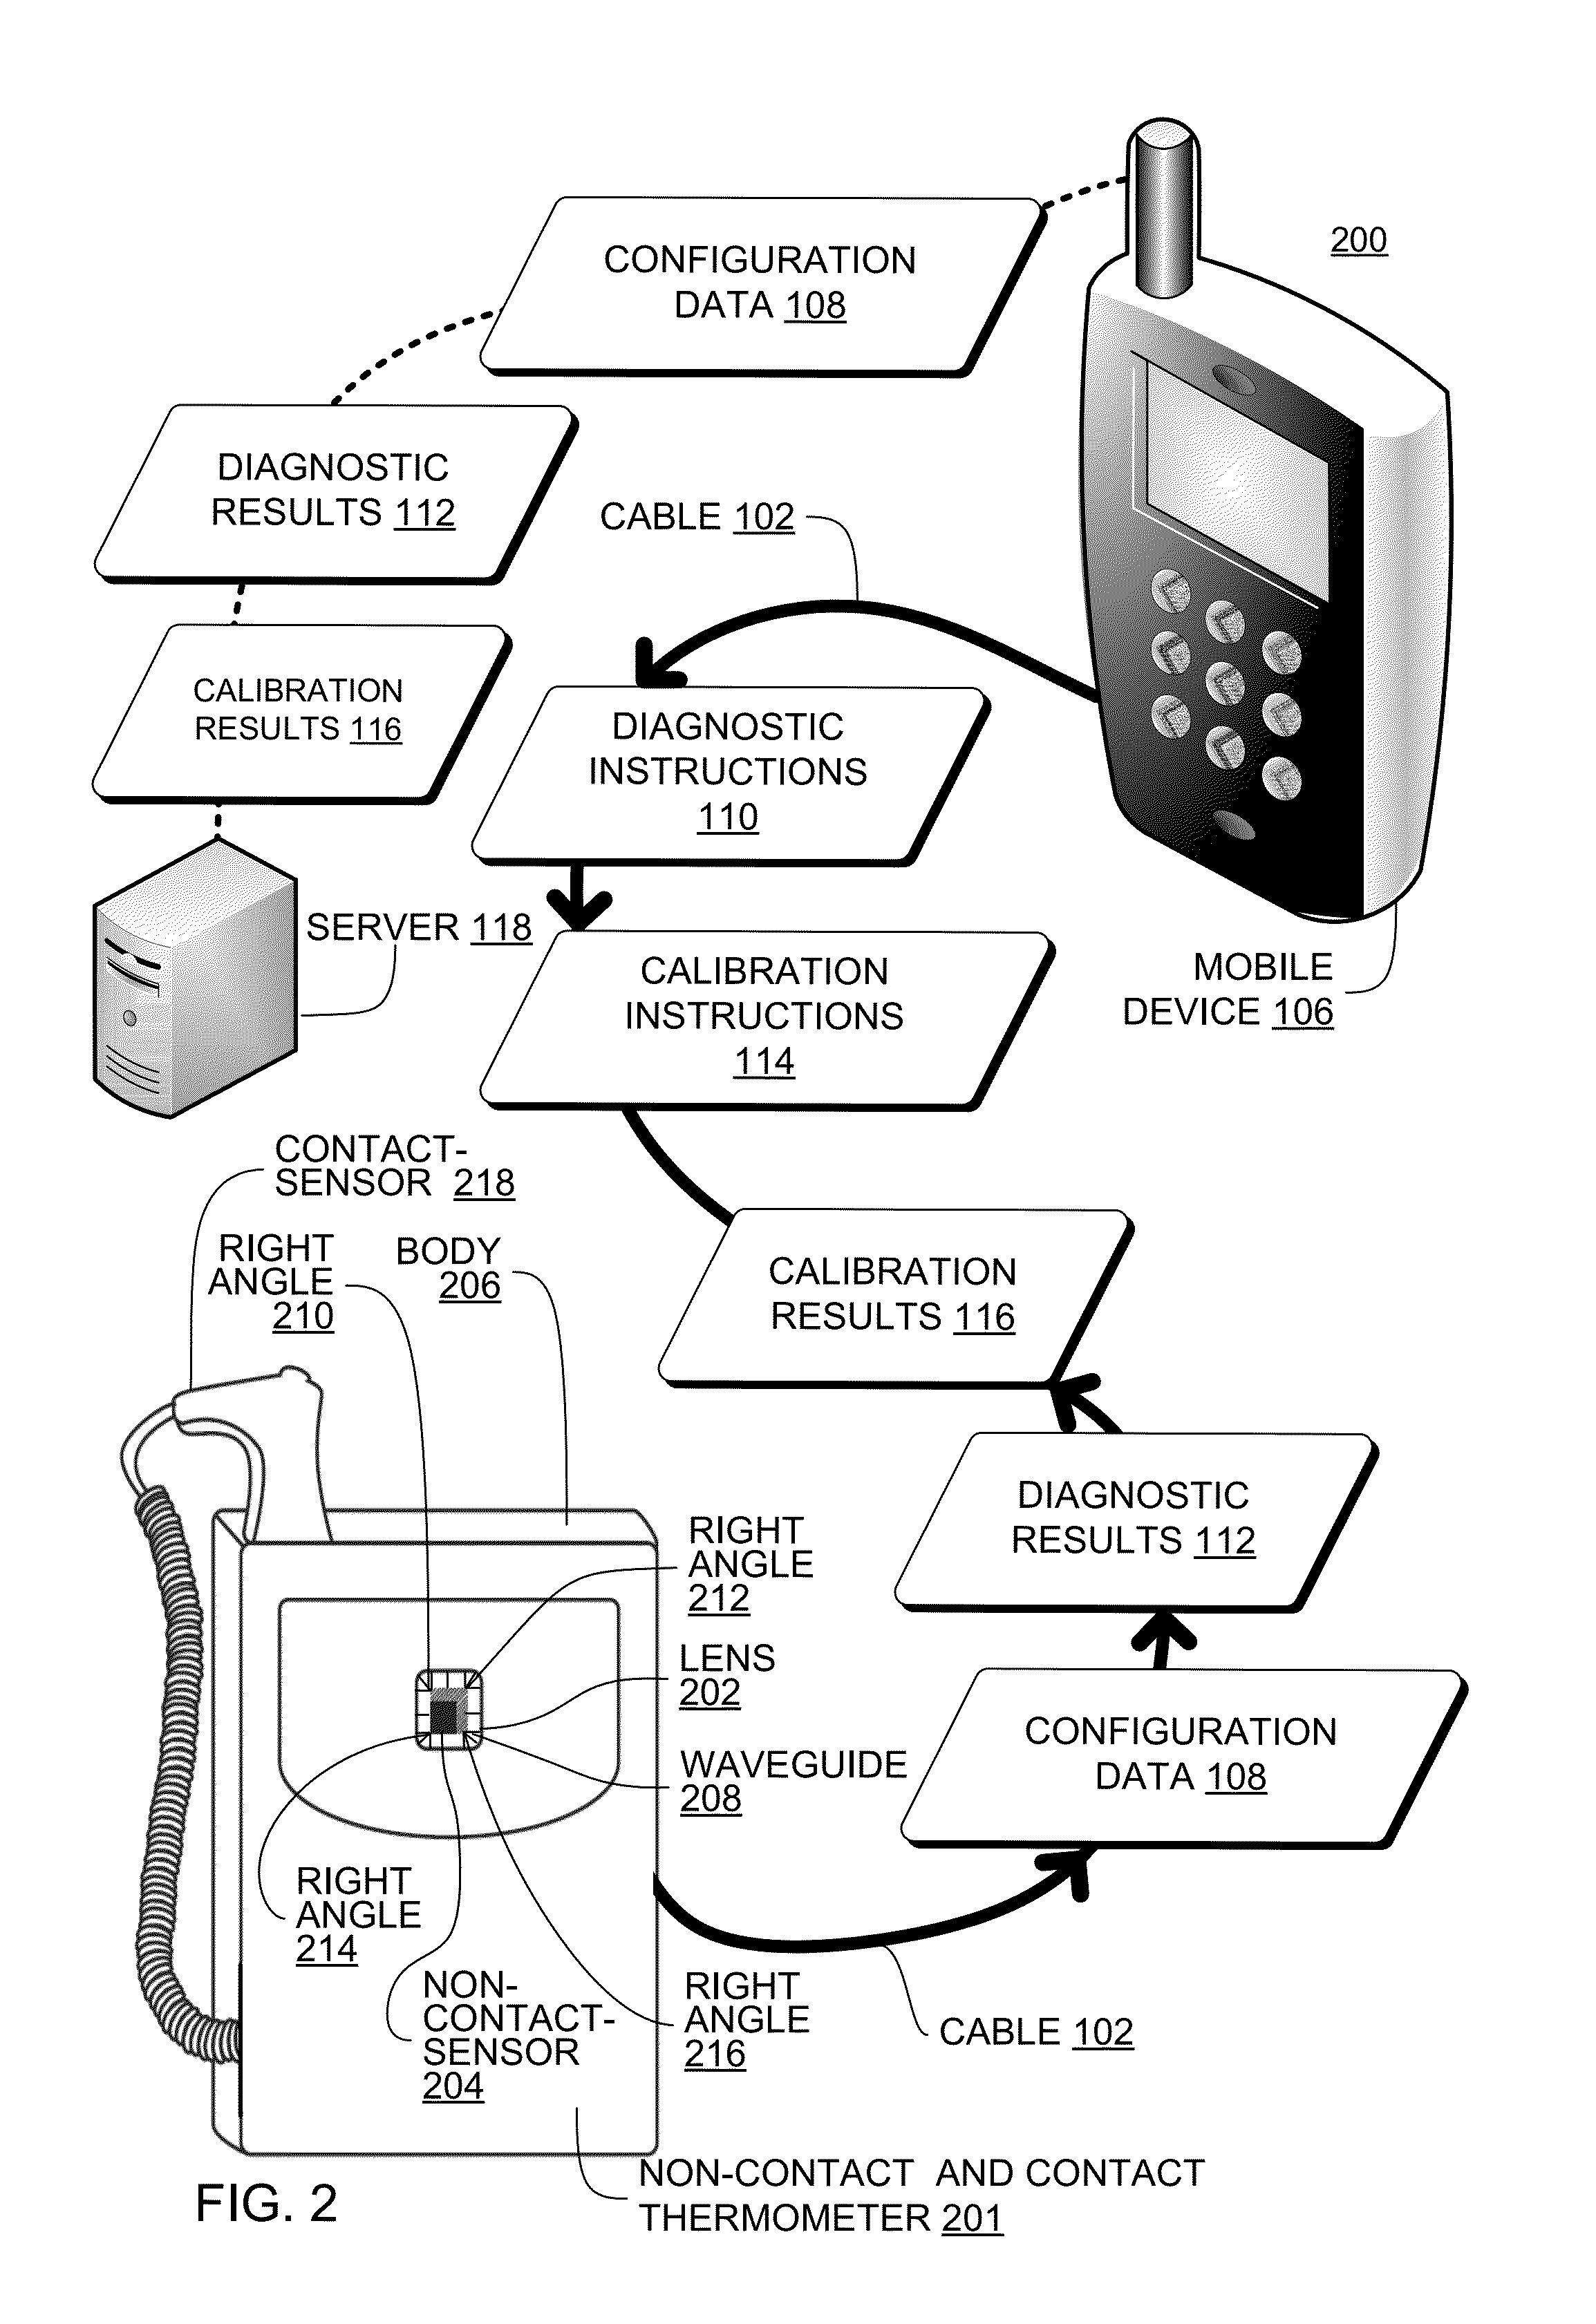 Calibration of a hand-held medical device by a mobile device